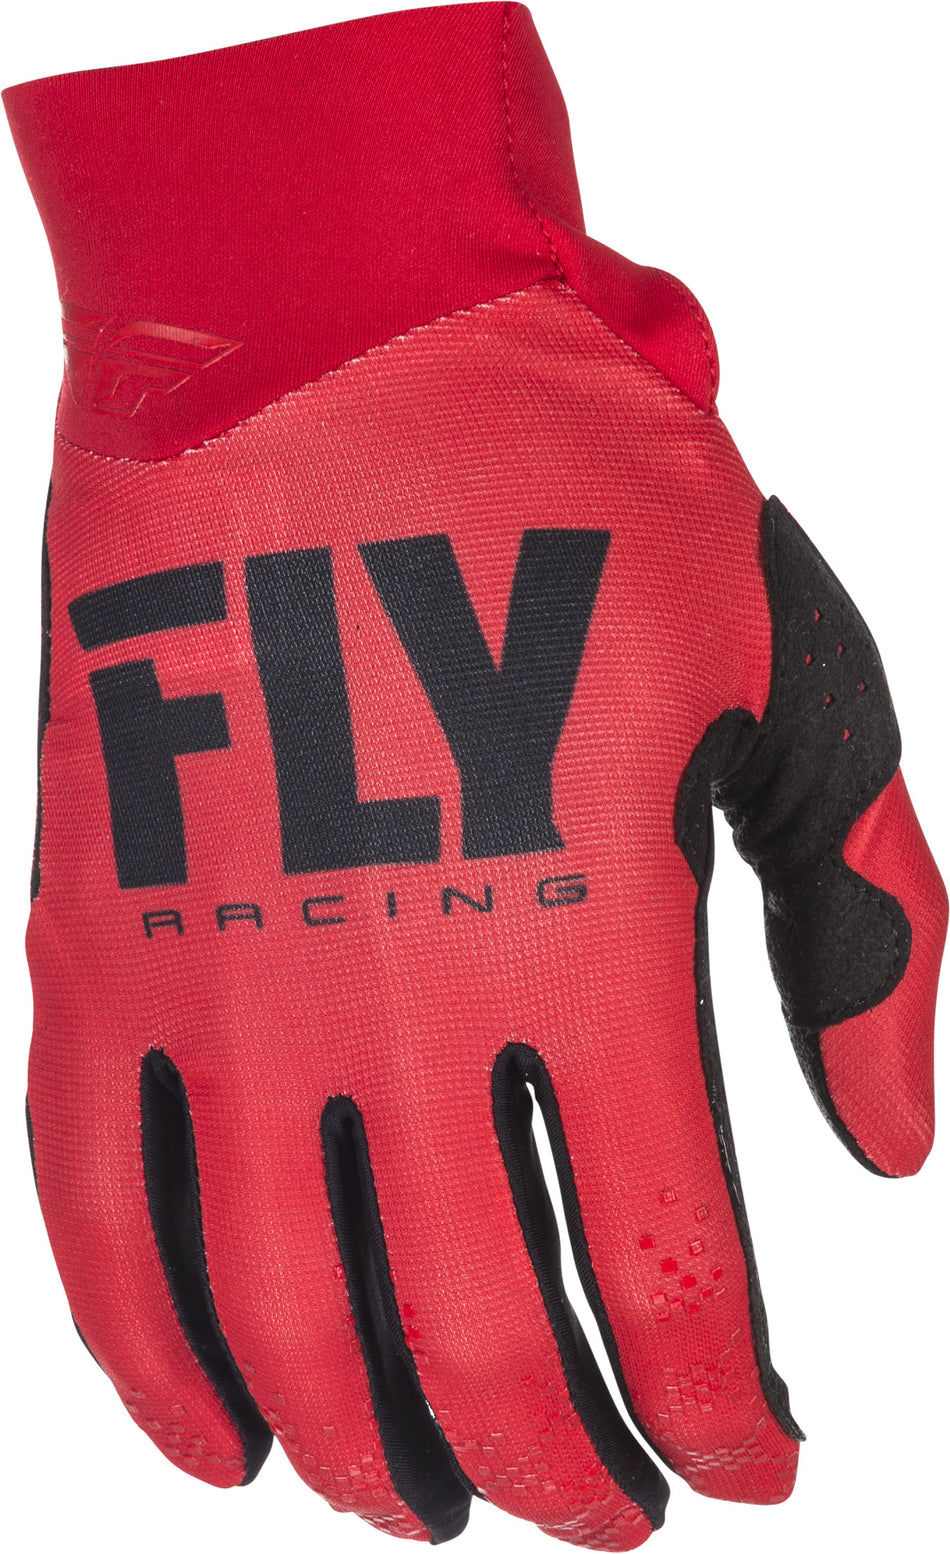 FLY RACING Pro Lite Gloves Red Sz 13 371-81213